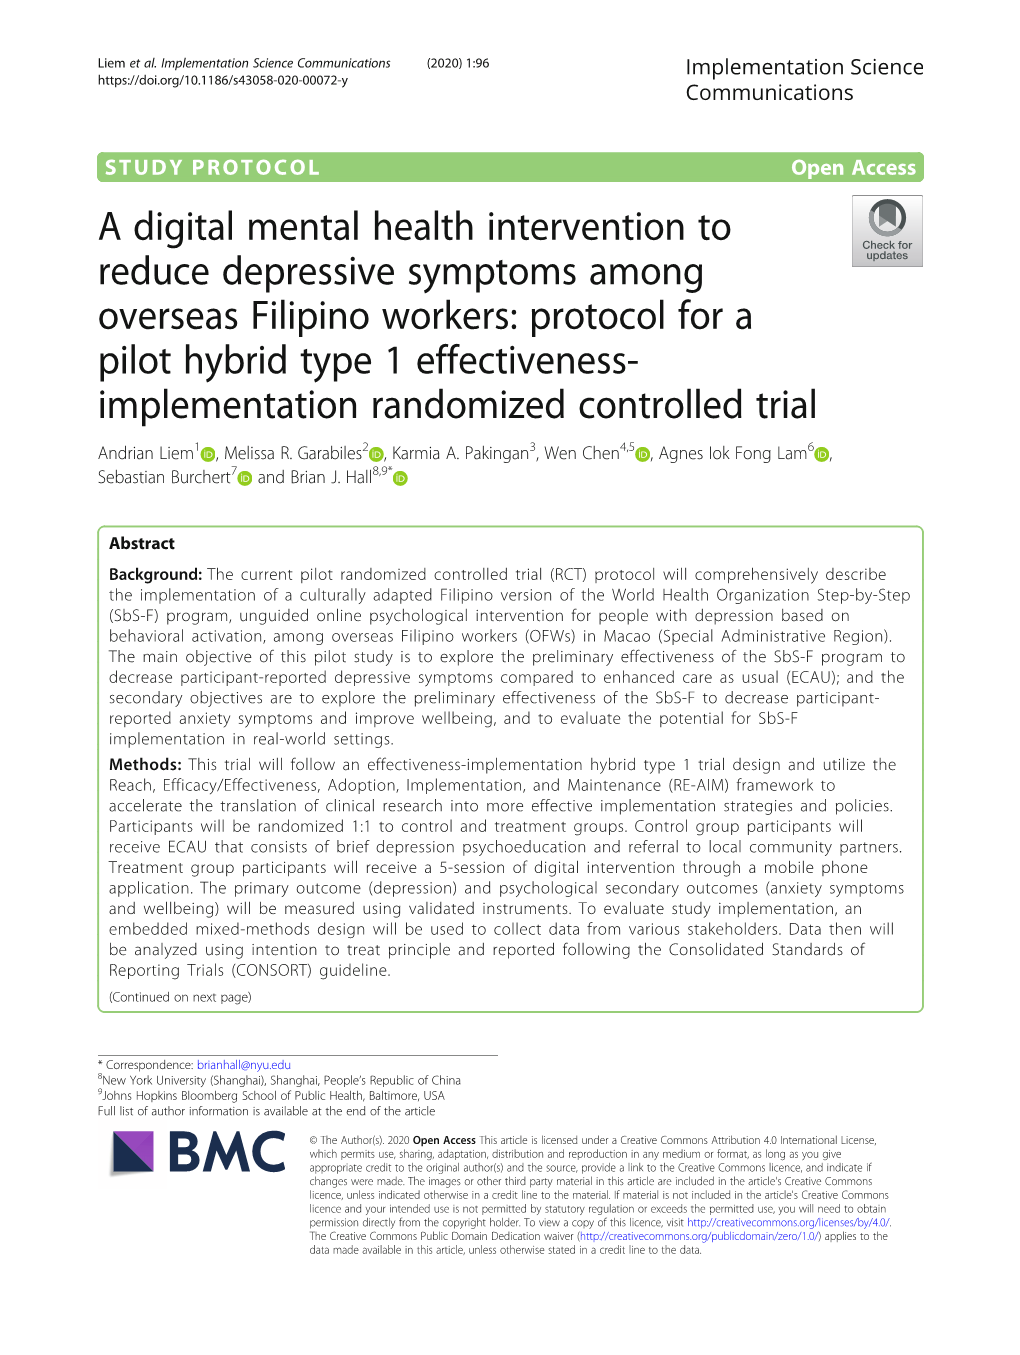 A Digital Mental Health Intervention to Reduce Depressive Symptoms Among Overseas Filipino Workers